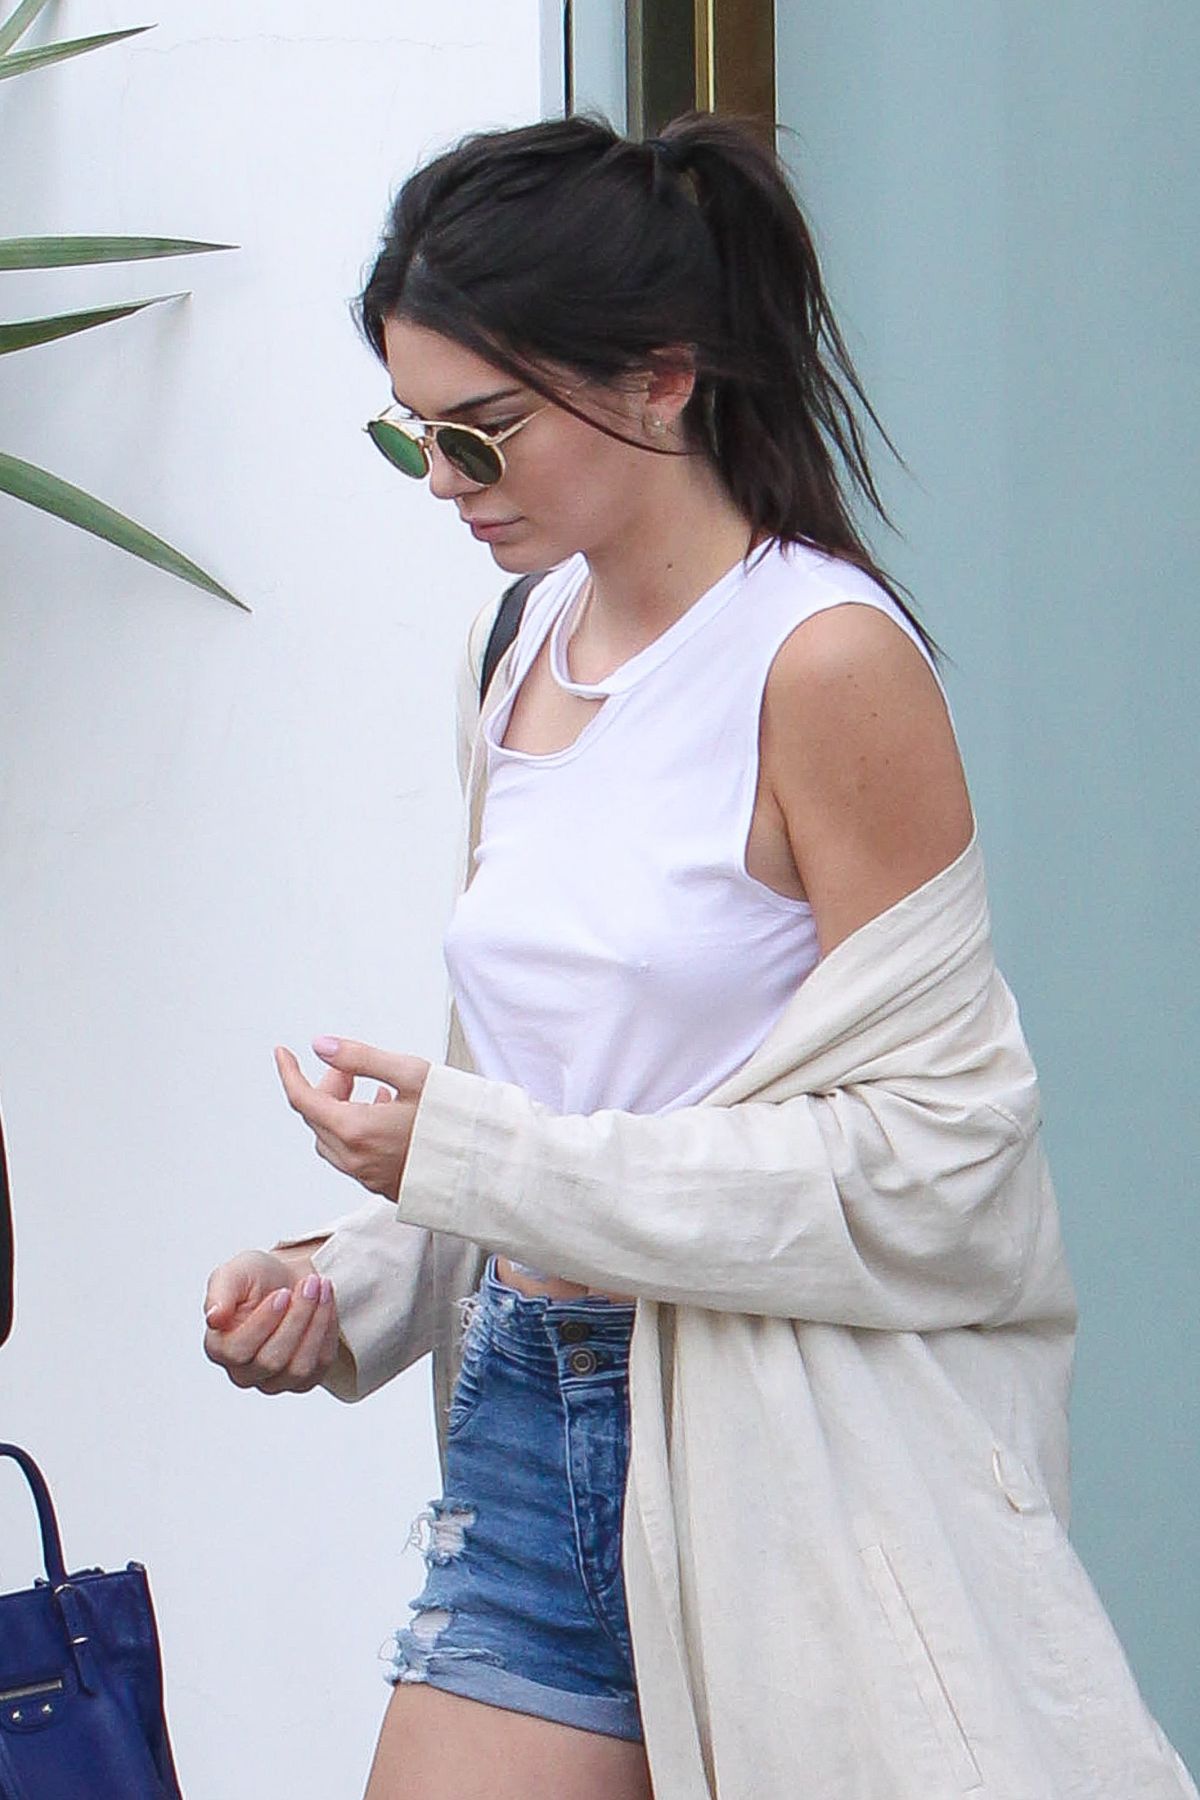 kendall-jenner-out-shopping-in-beverly-hills-04-06-2016_1.jpg